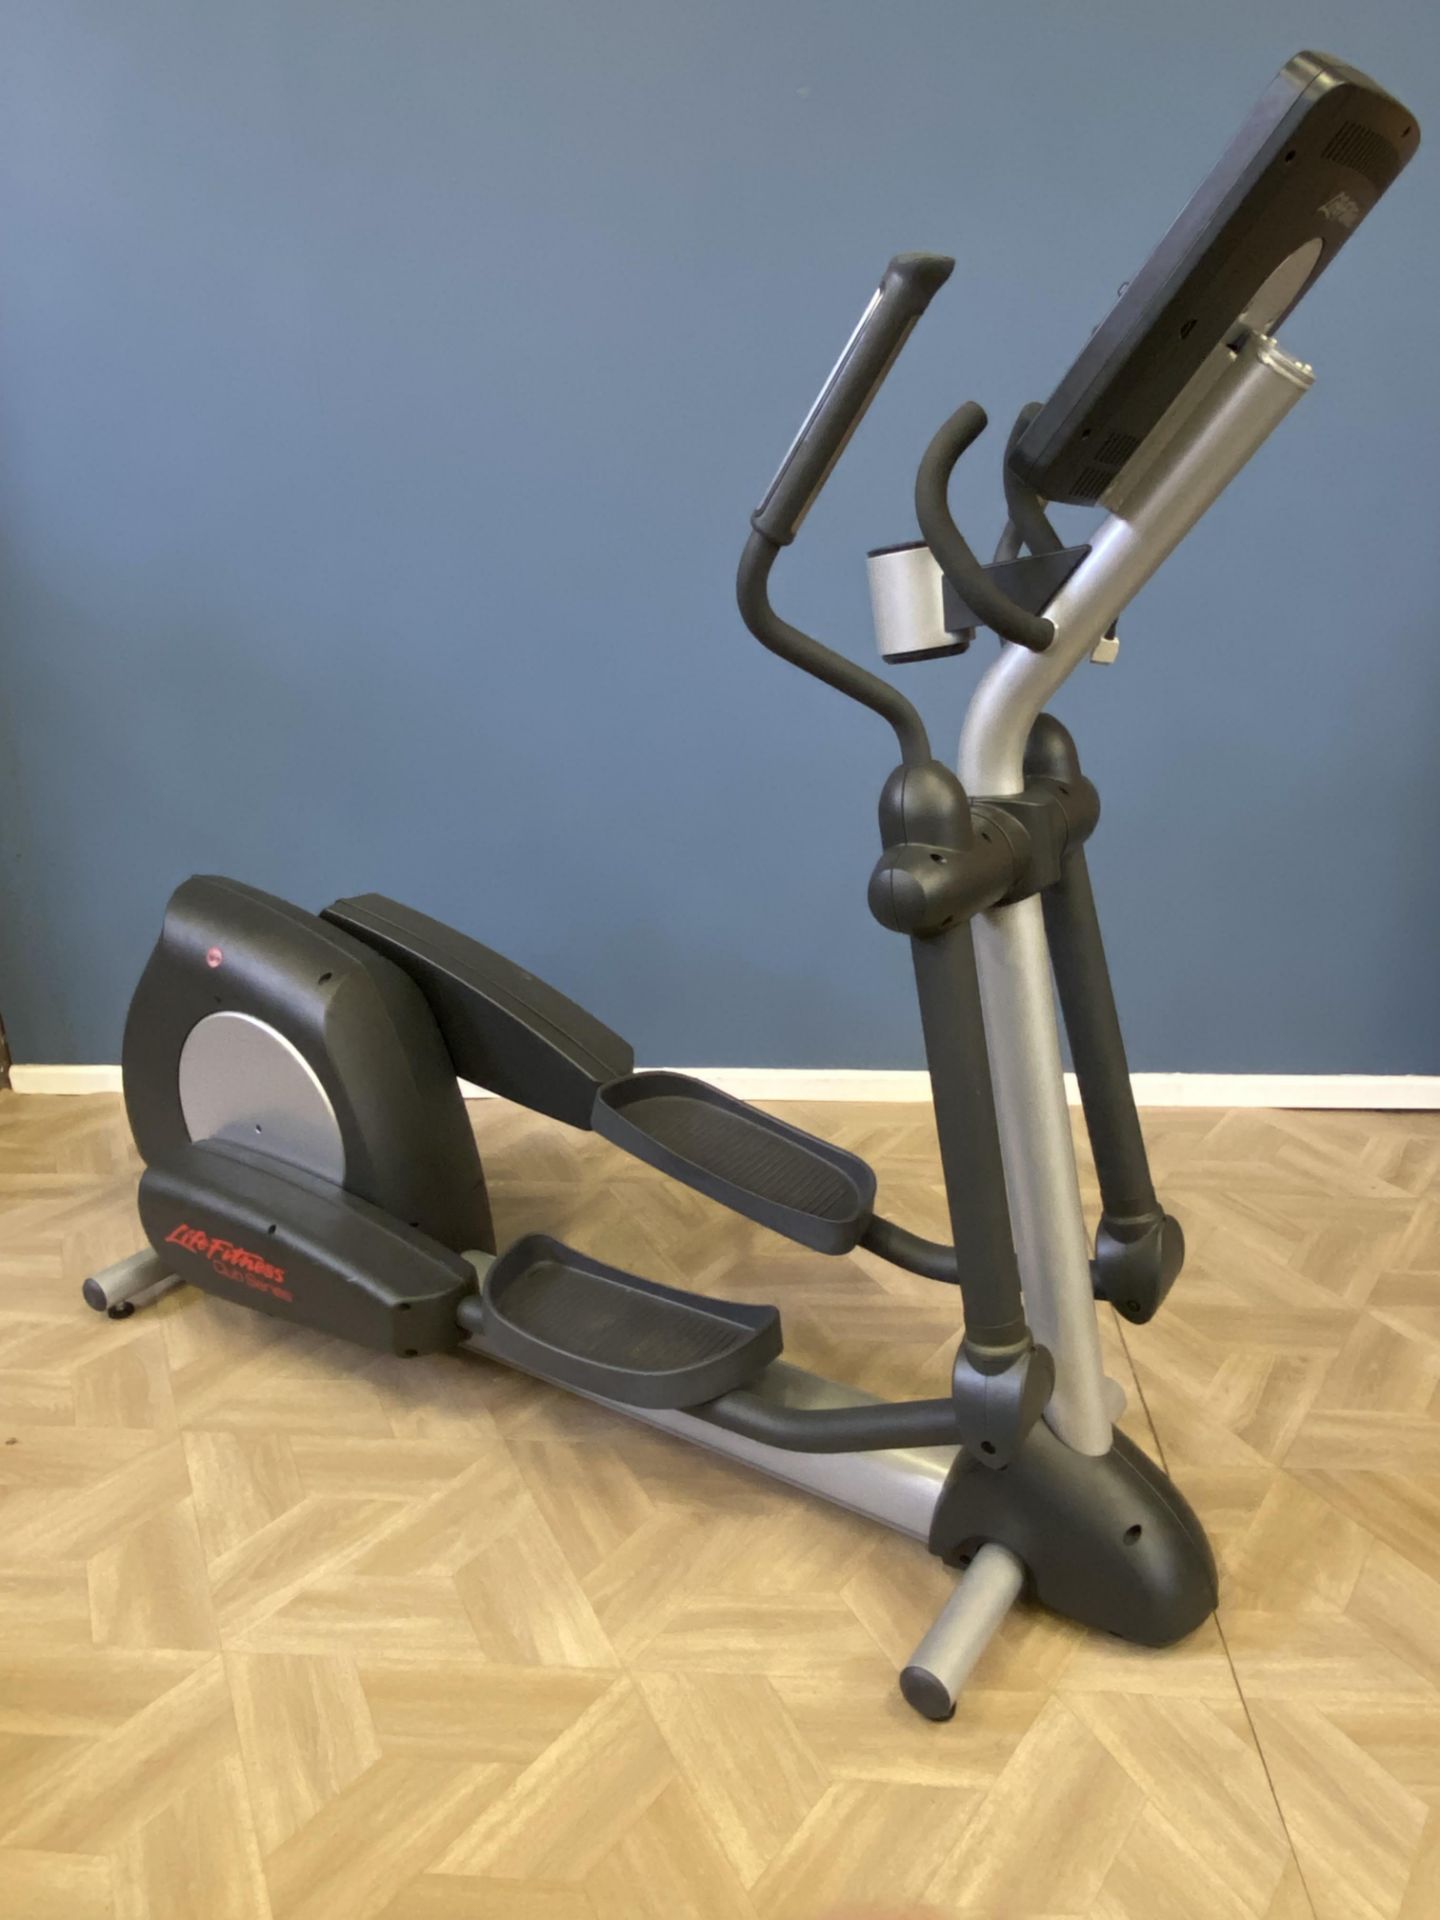 Lifestyle club series cross trainer - Image 2 of 5